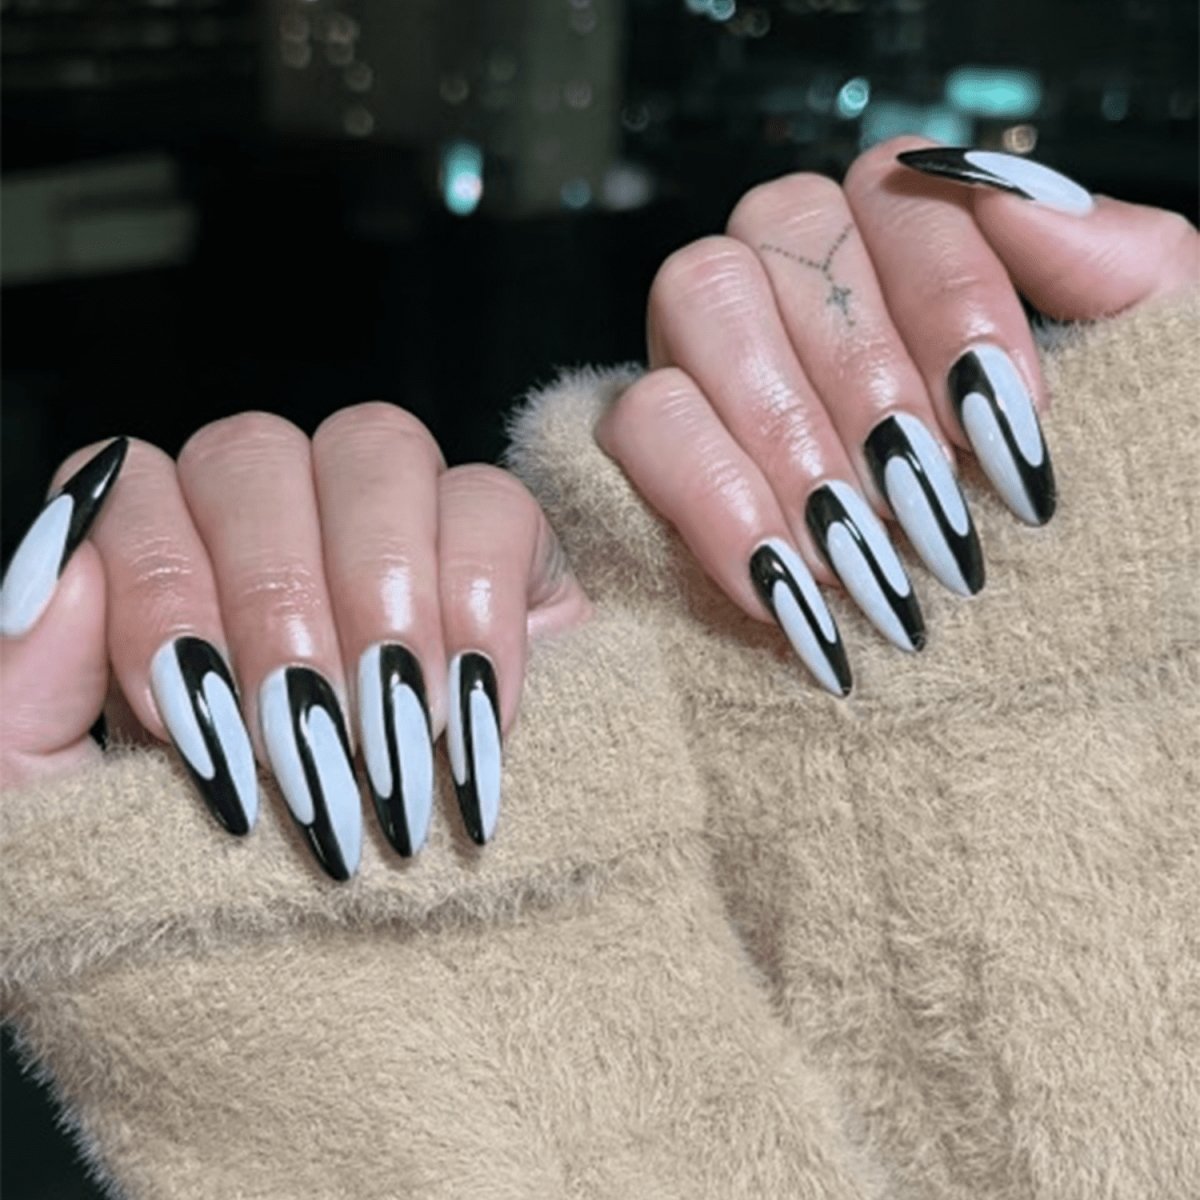 Oscars 2023 Nails : Nails that Nailed it - Pottle